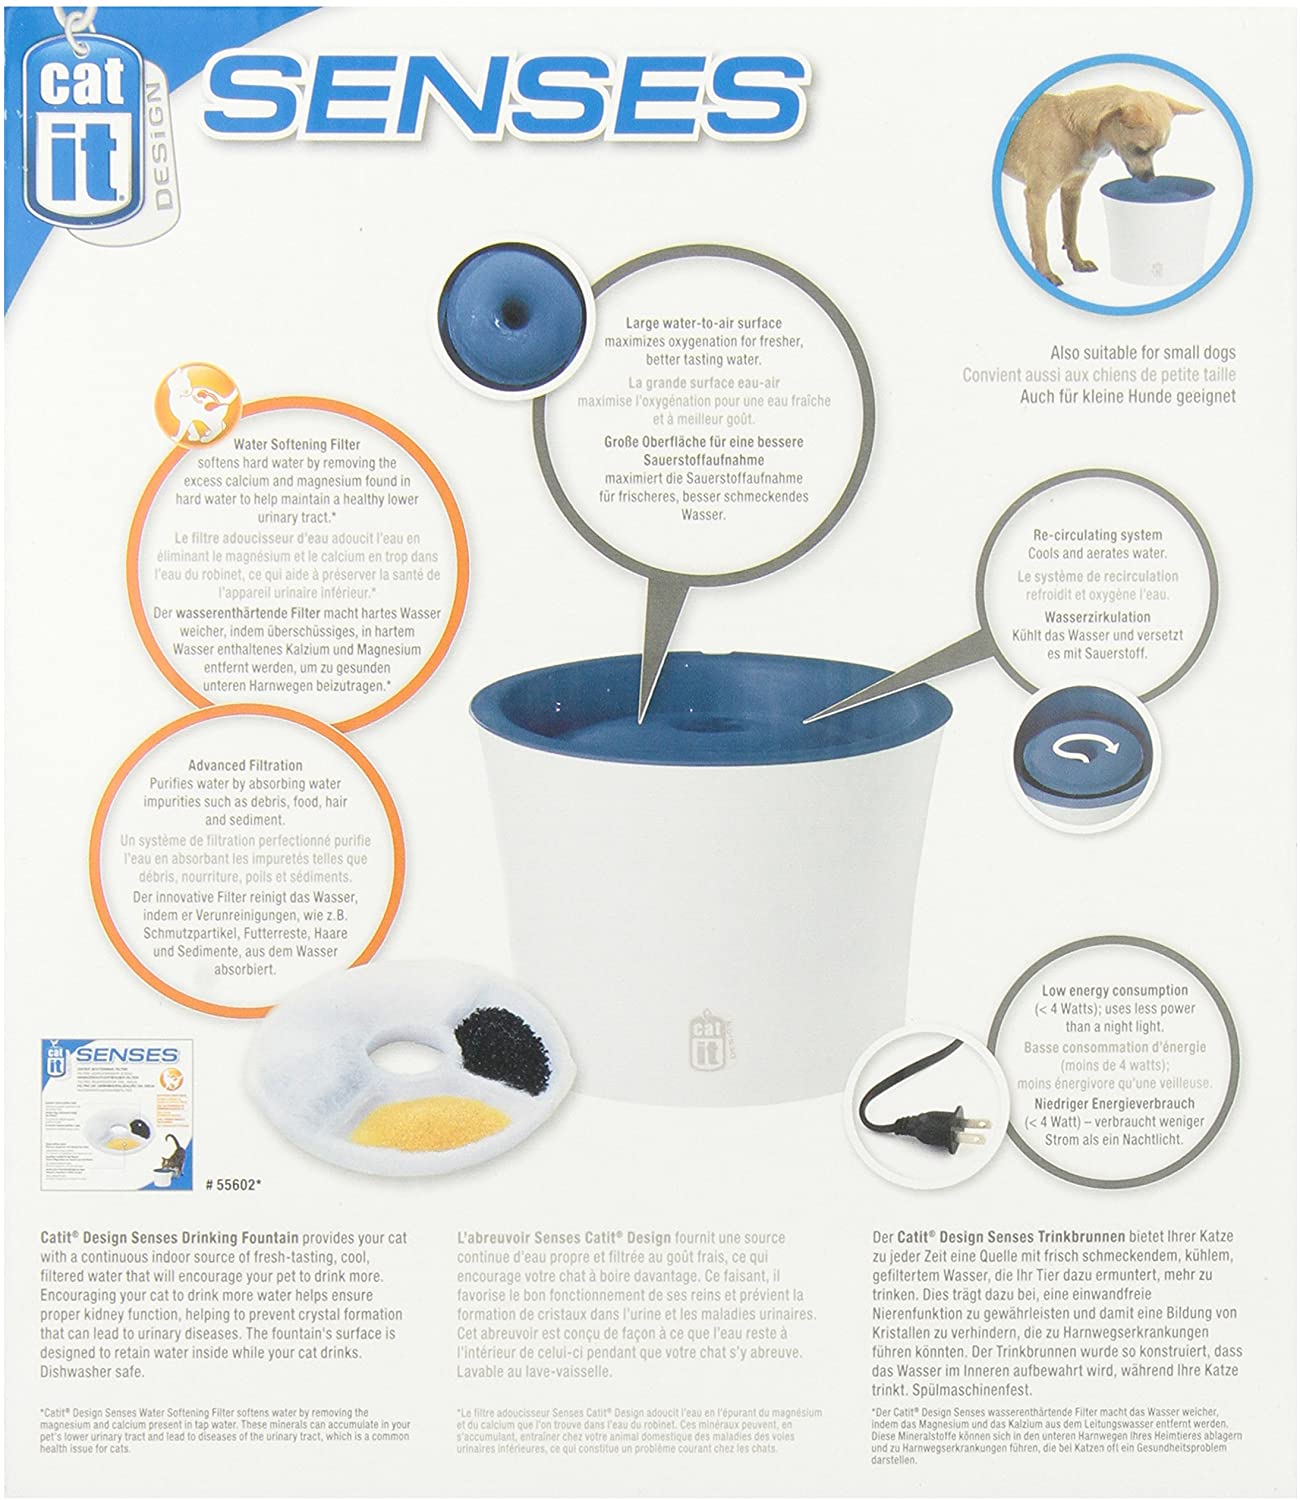 Catit Senses Drinking Fountain 3L with Water Softening Filter